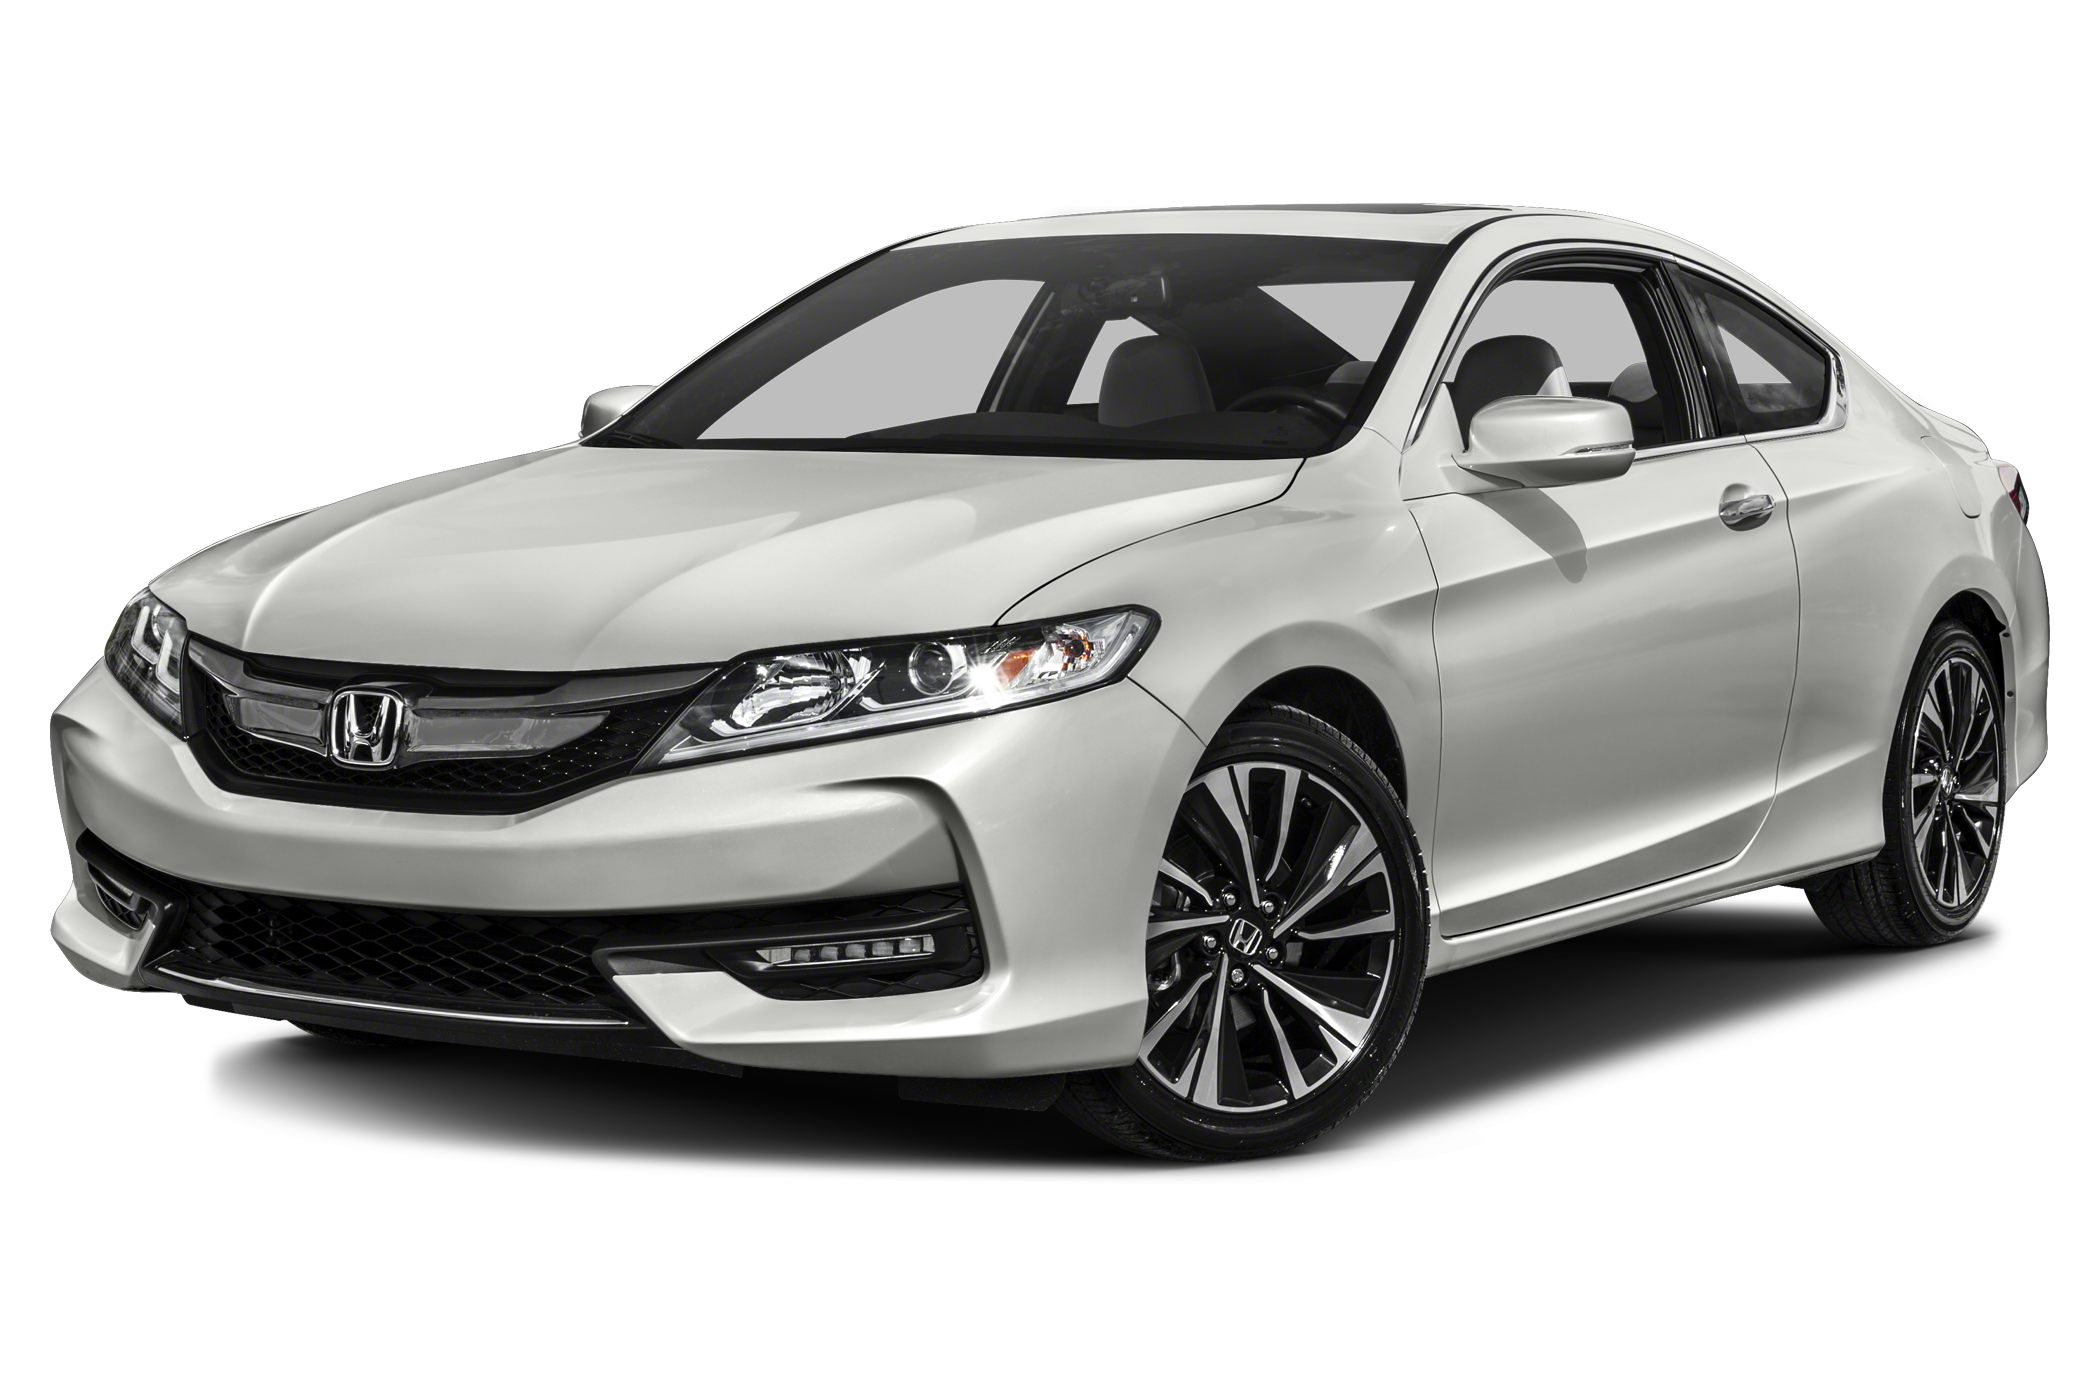 Great Deals on a new 2016 Honda Accord EX-L 2dr Coupe at The Autoblog